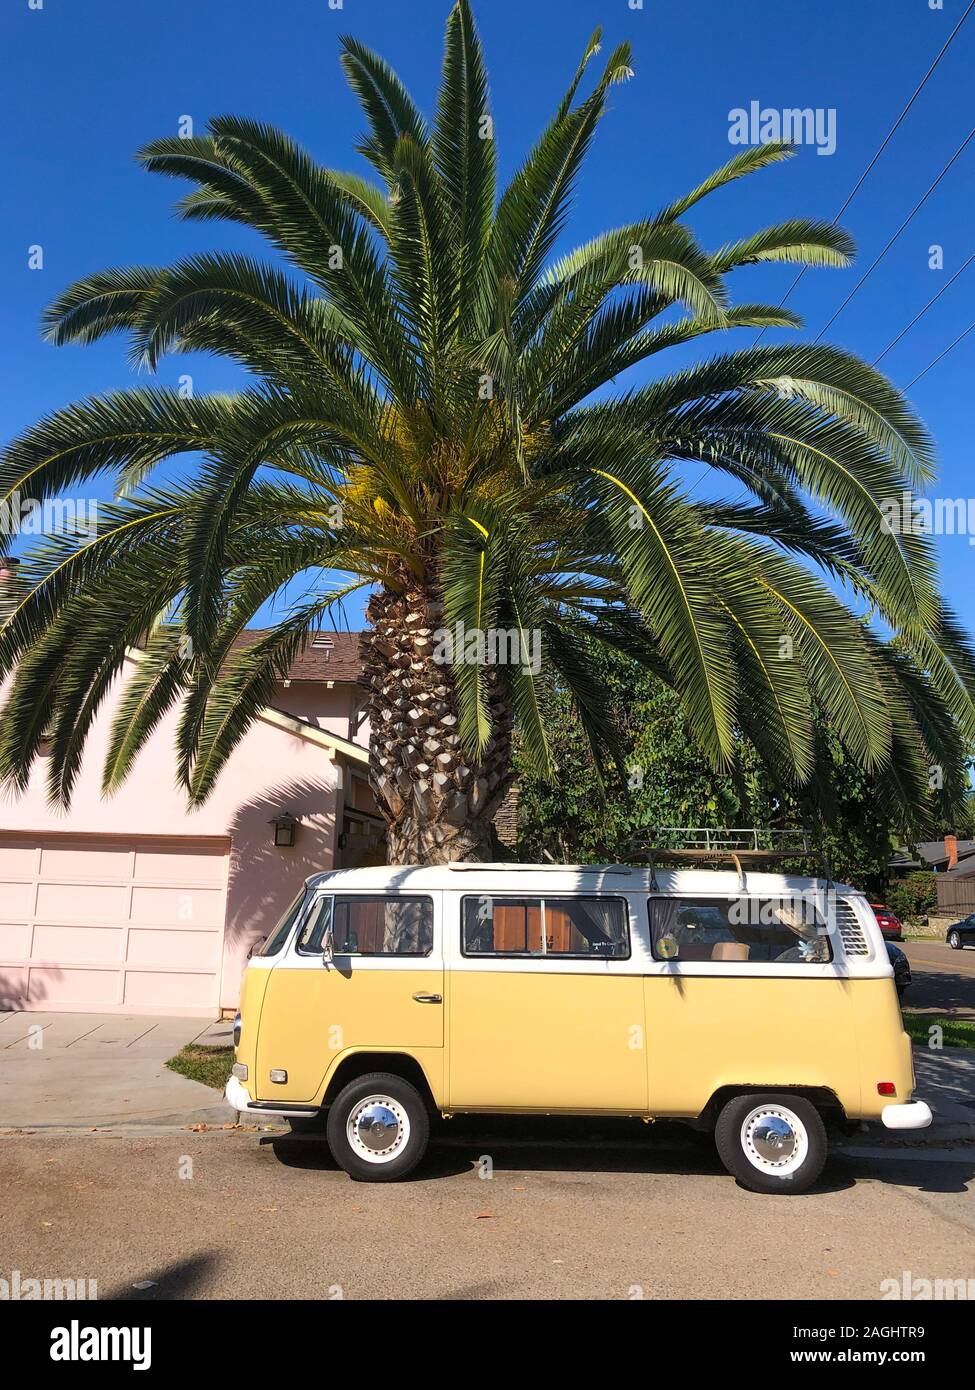 Classic beige and white vintage Volkswagen T1 camper van parked in front of pink house. San Diego, California, USA. July 13th, 2019 Stock Photo